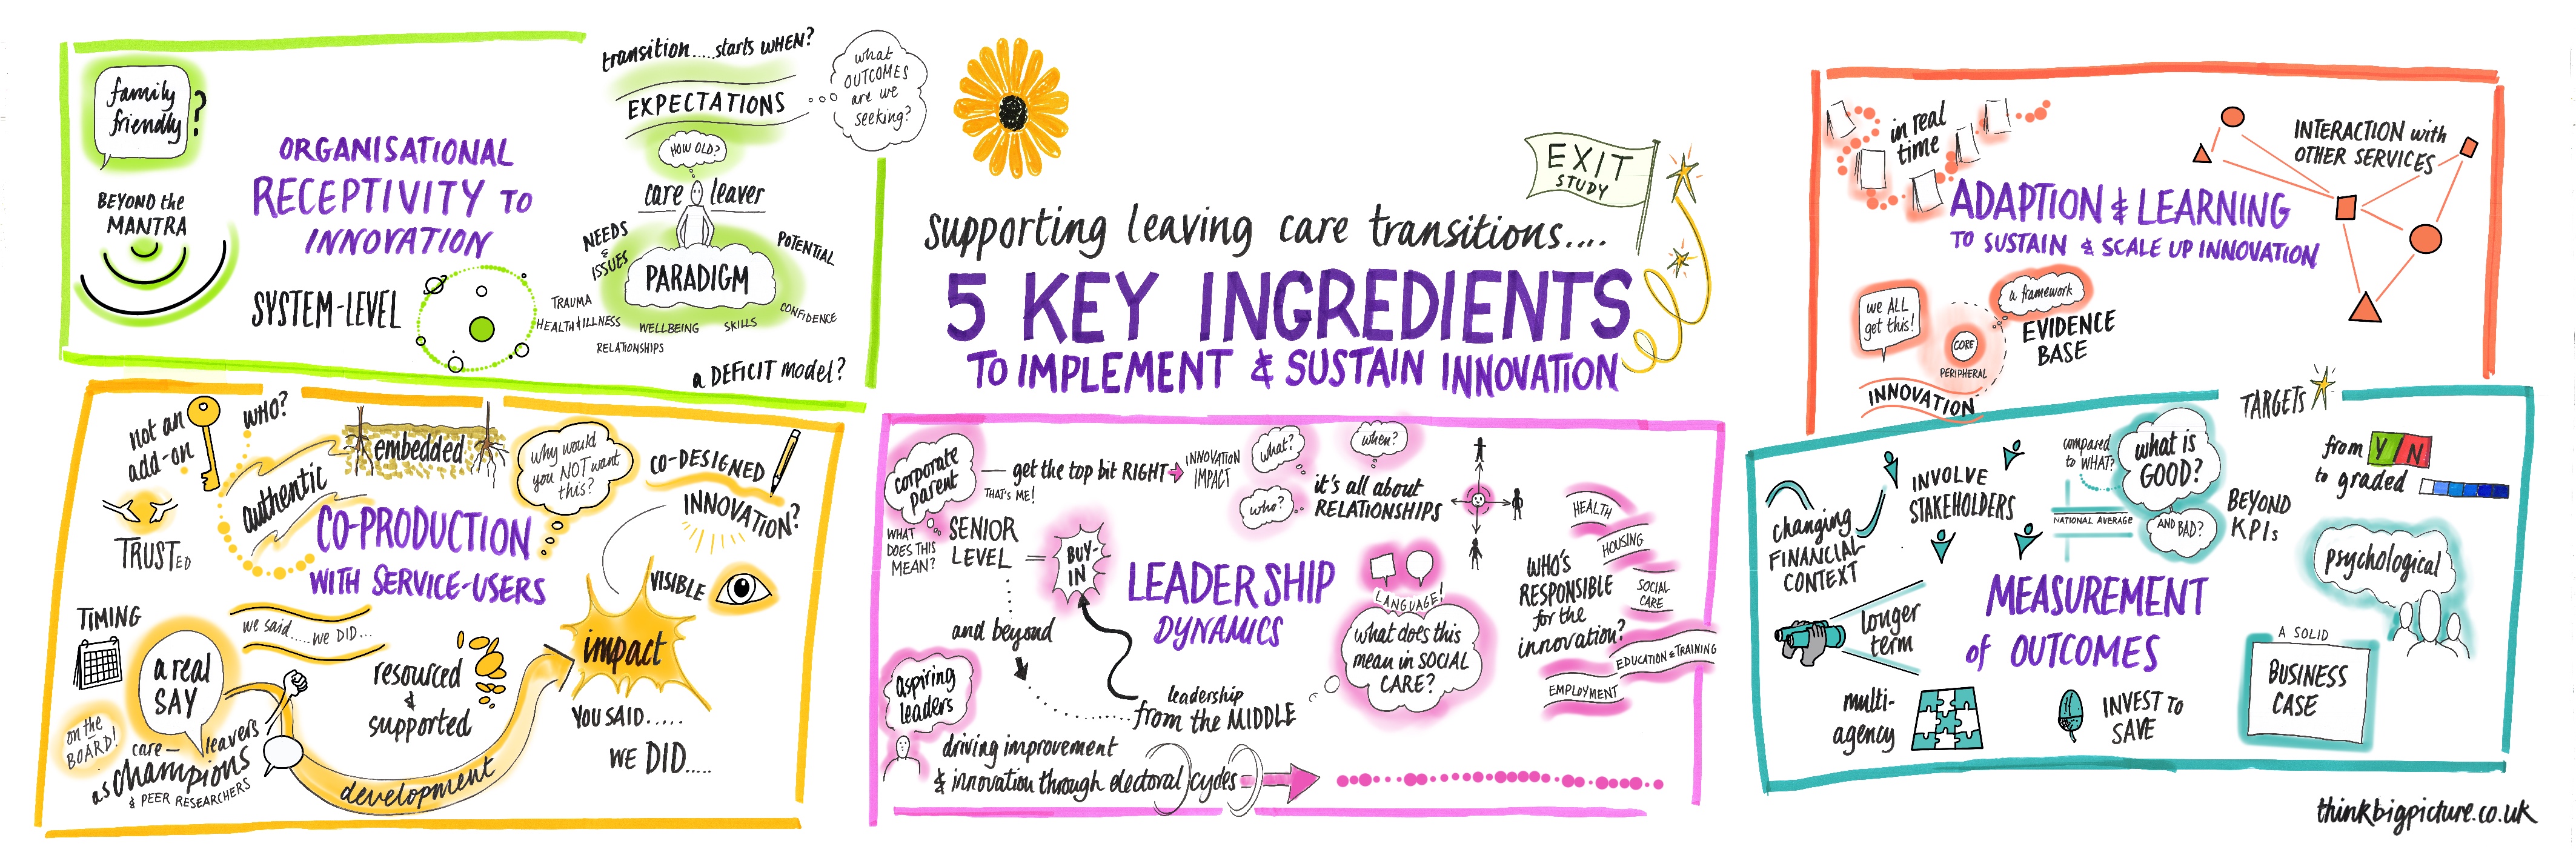 Five ingredients to implement and sustain innovation